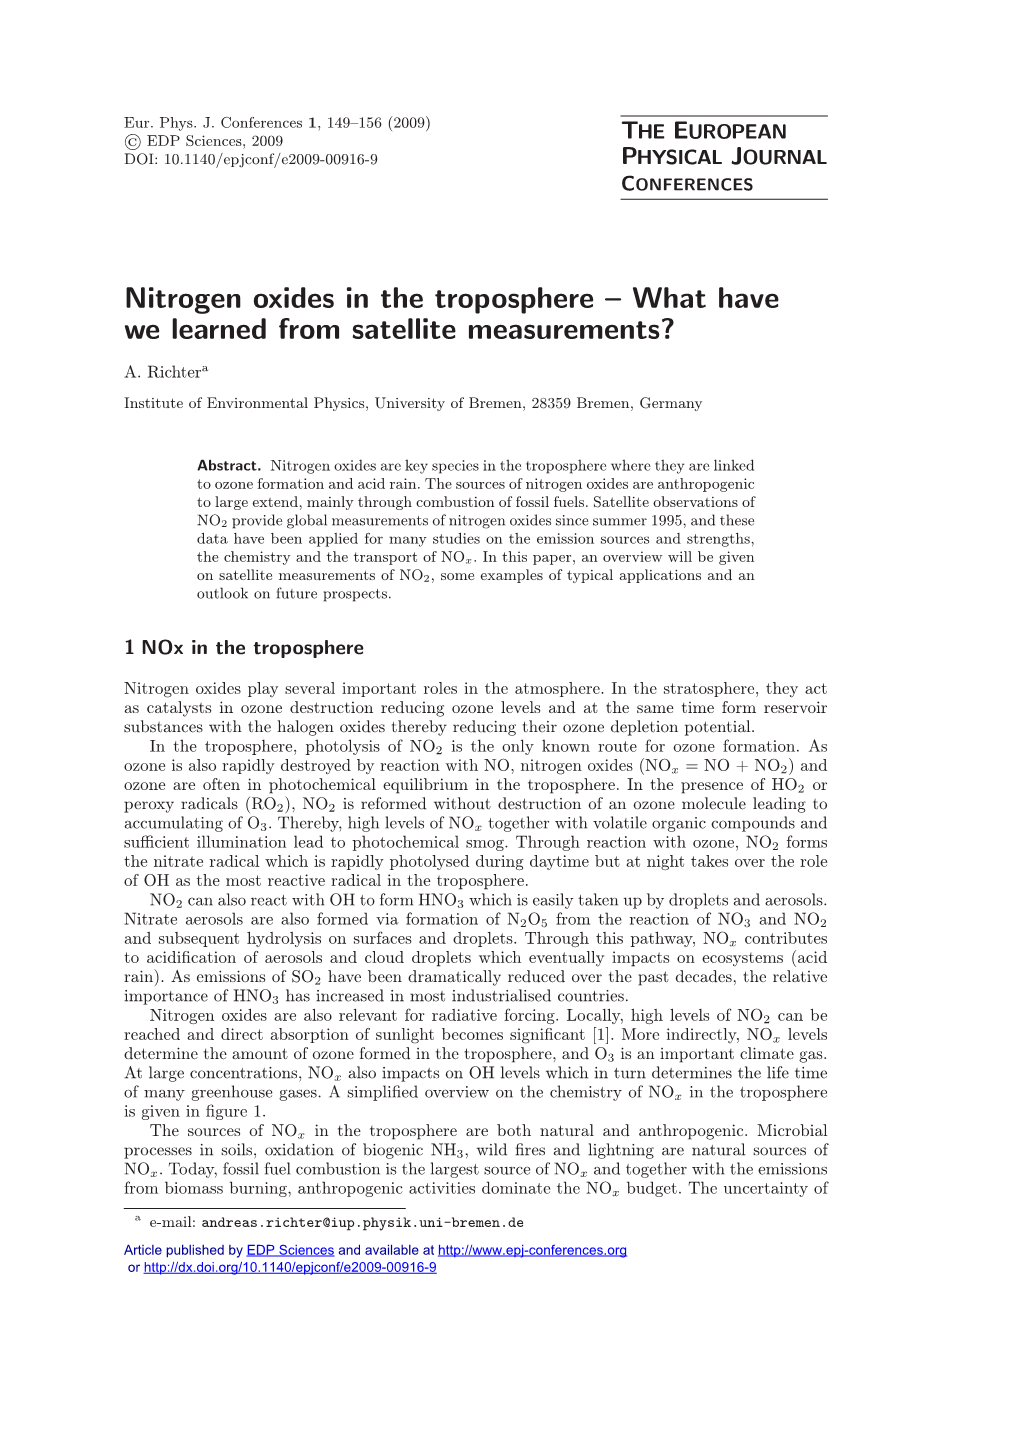 Nitrogen Oxides in the Troposphere – What Have We Learned from Satellite Measurements?